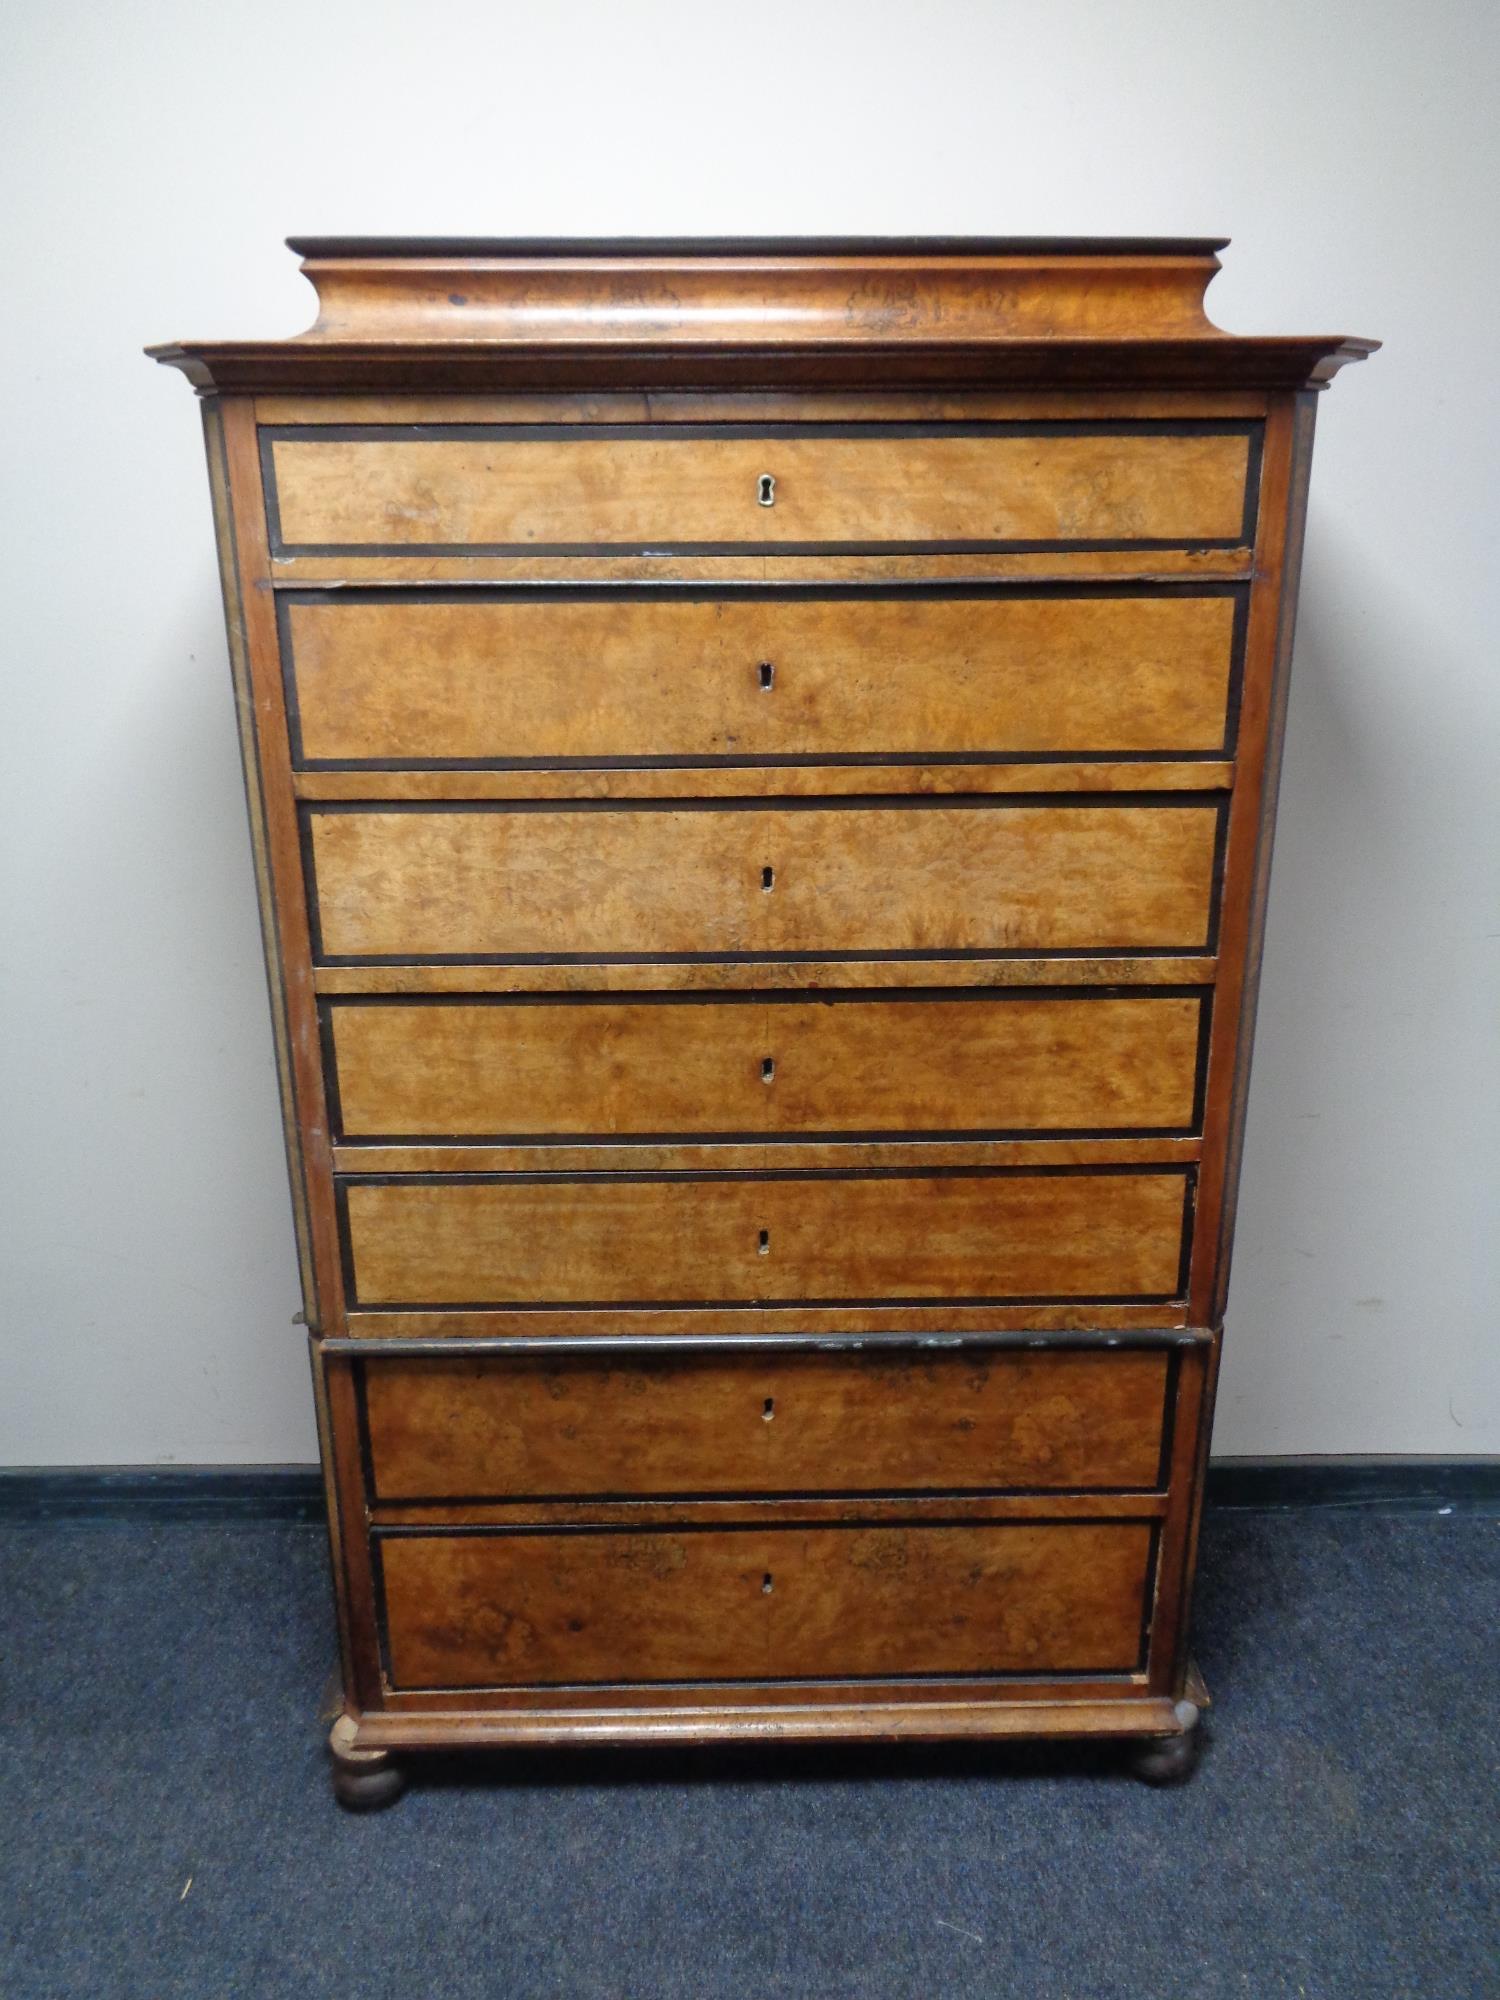 A 19th century continental seven drawer chest on bun feet (as found).